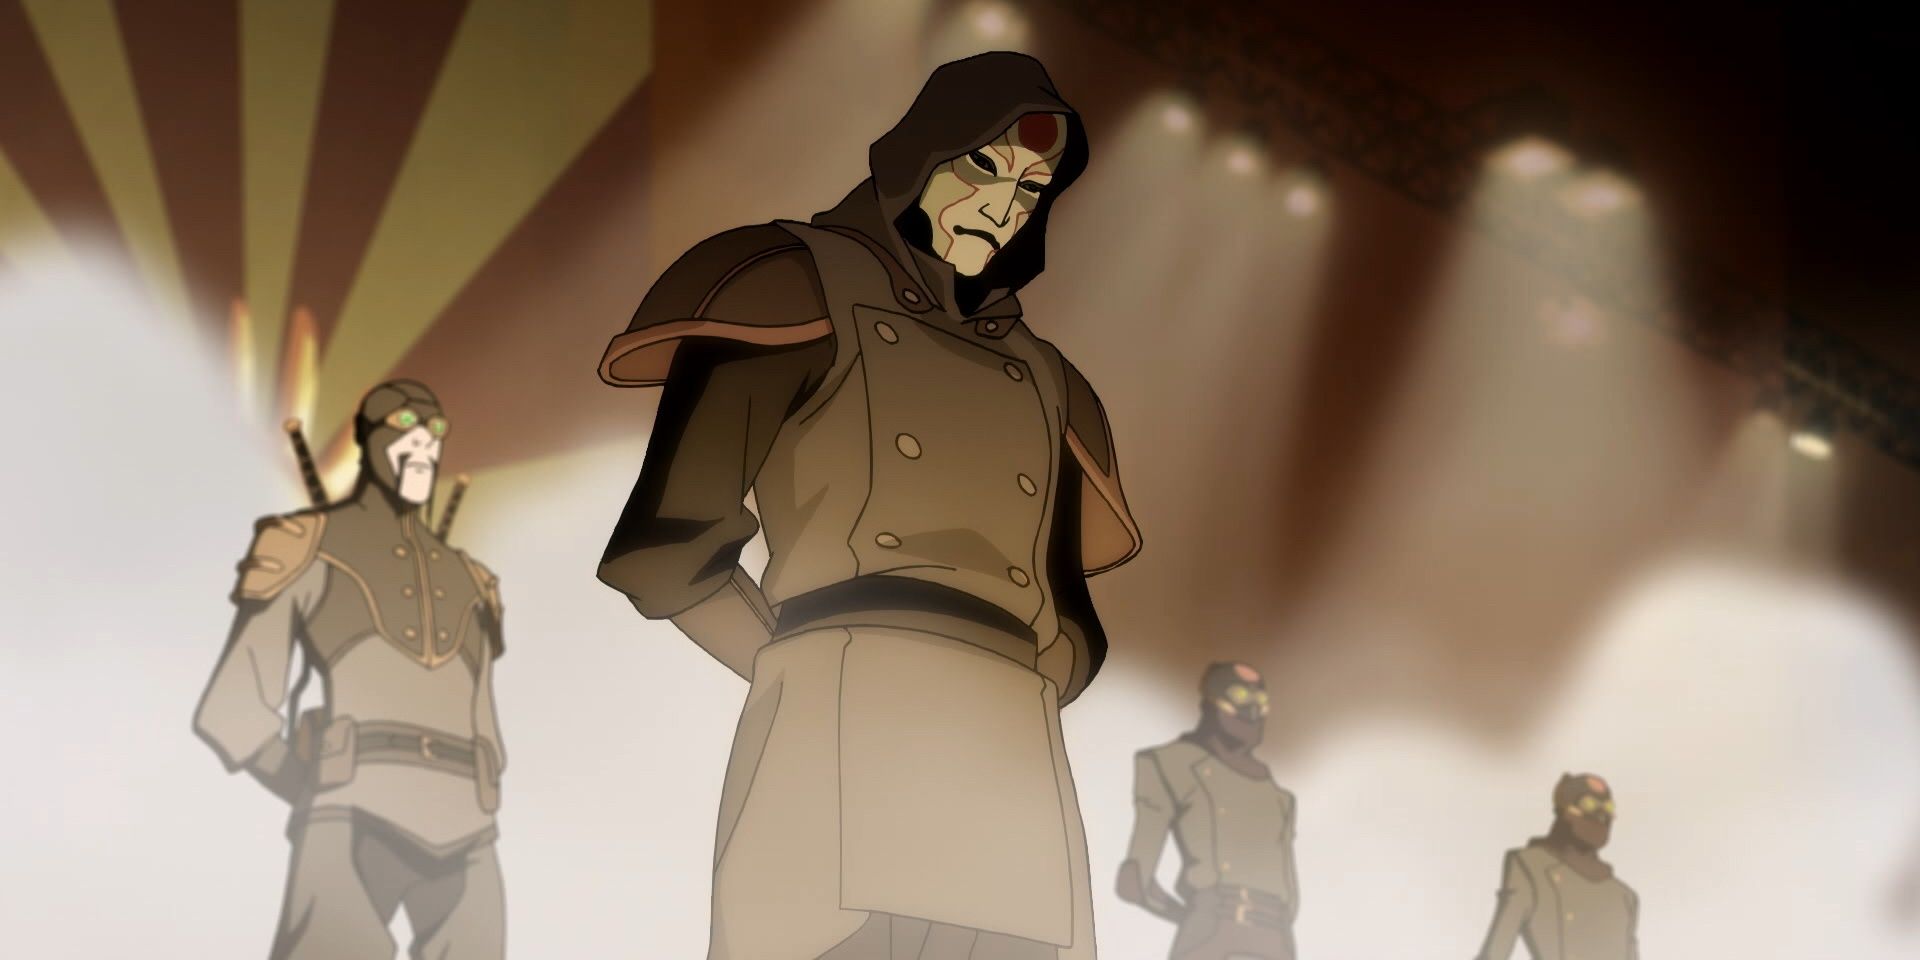 Amon and the Equalists